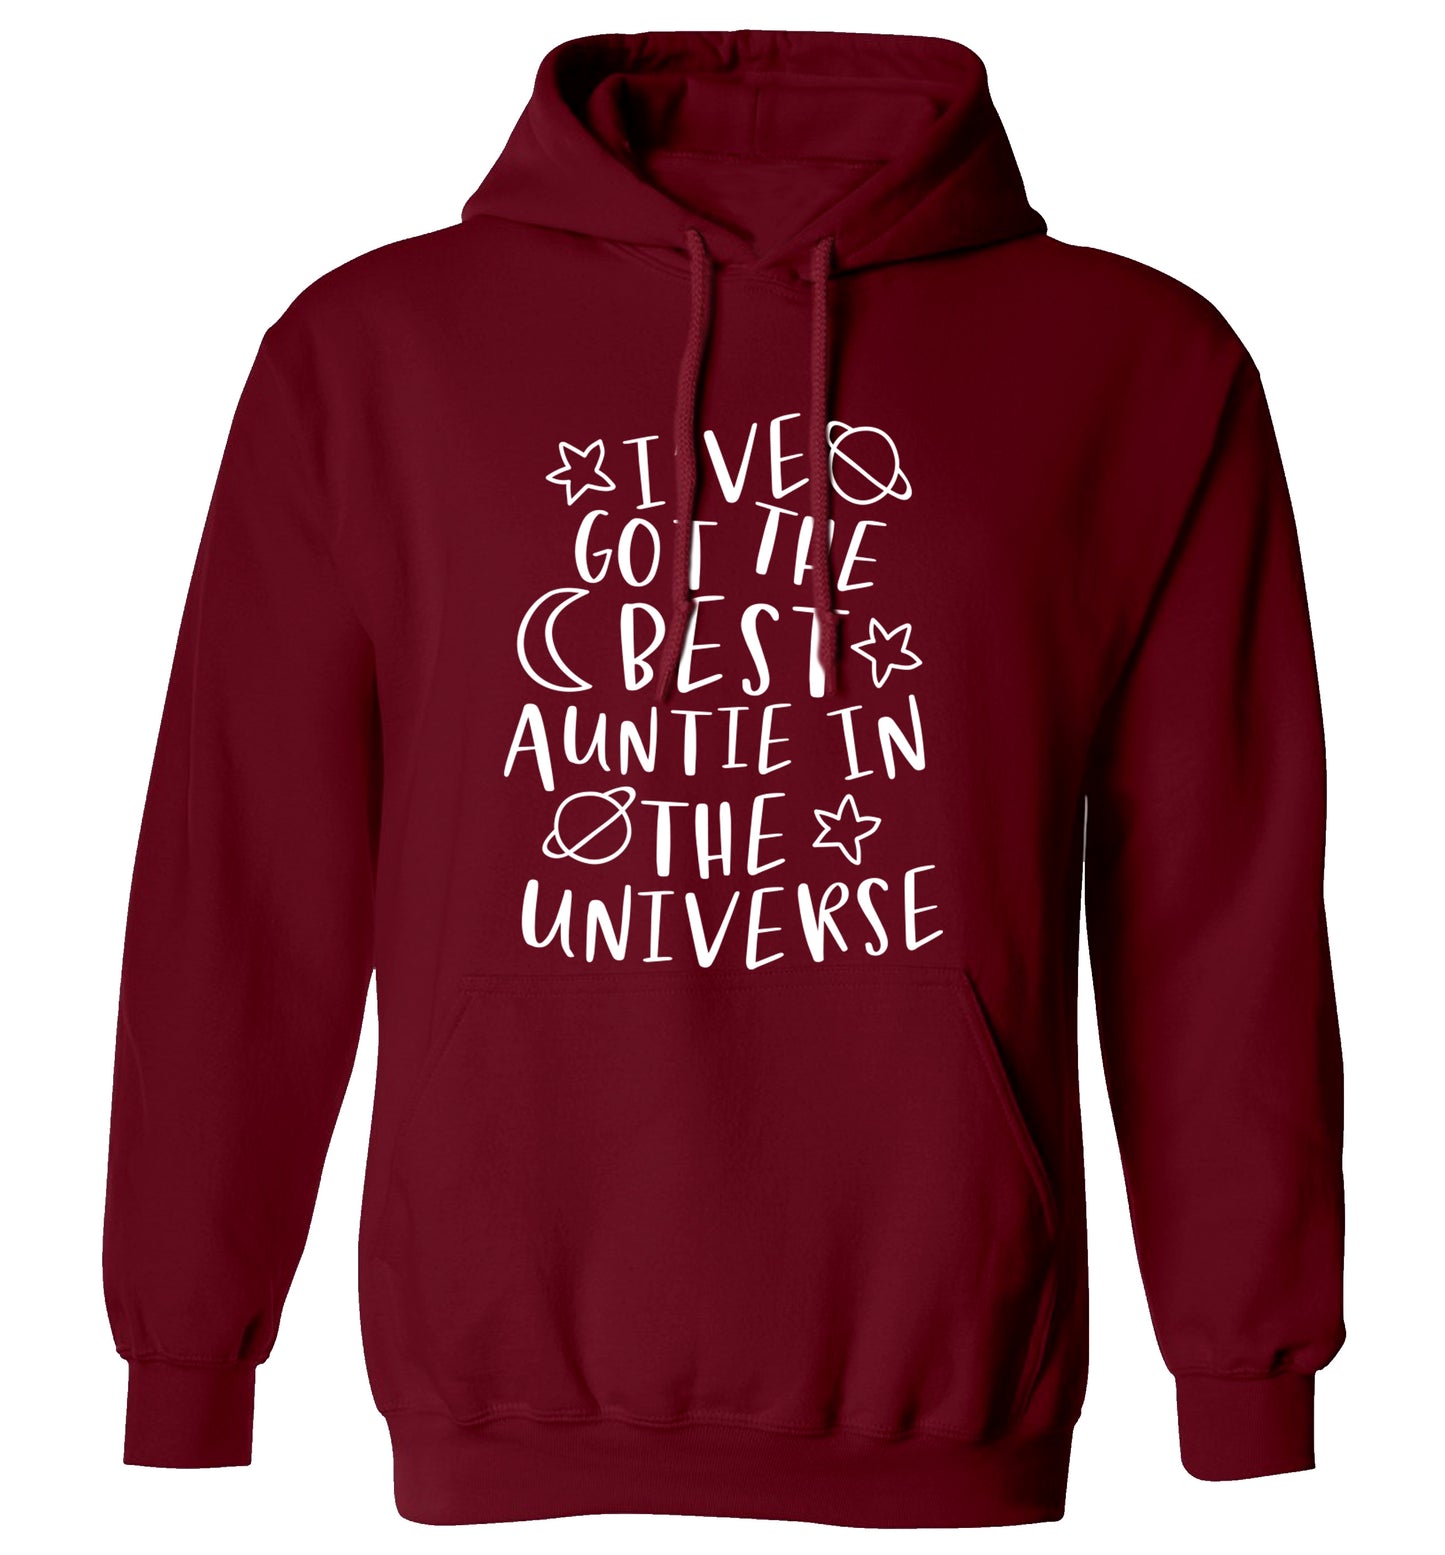 I've got the best auntie in the universe adults unisex maroon hoodie 2XL